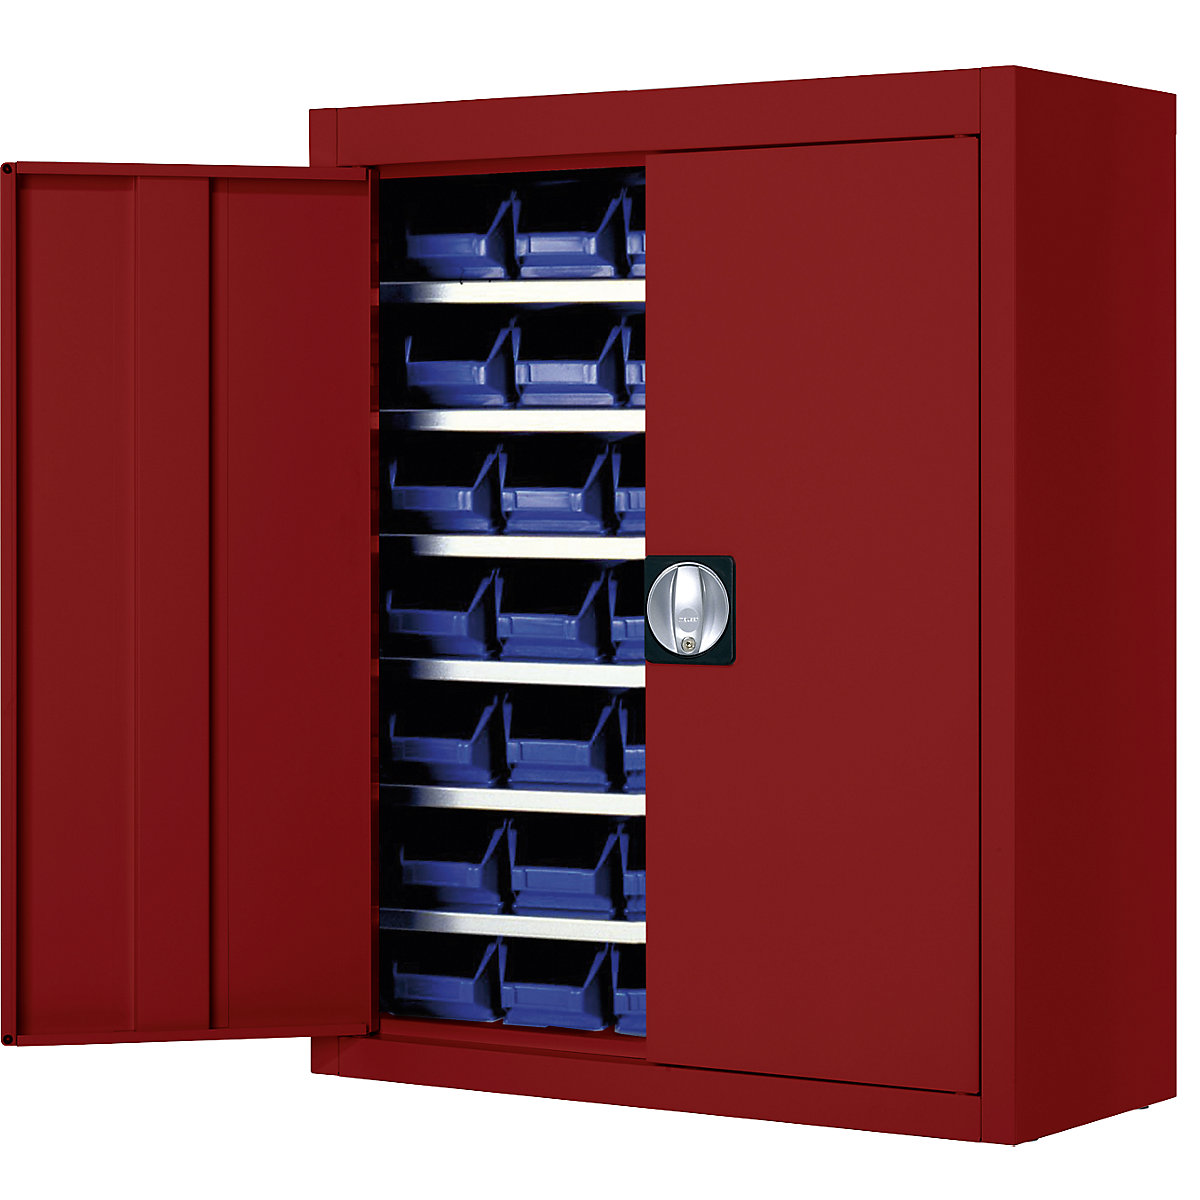 Storage cupboard with open fronted storage bins – mauser, HxWxD 820 x 680 x 280 mm, single colour, red, 42 bins-5